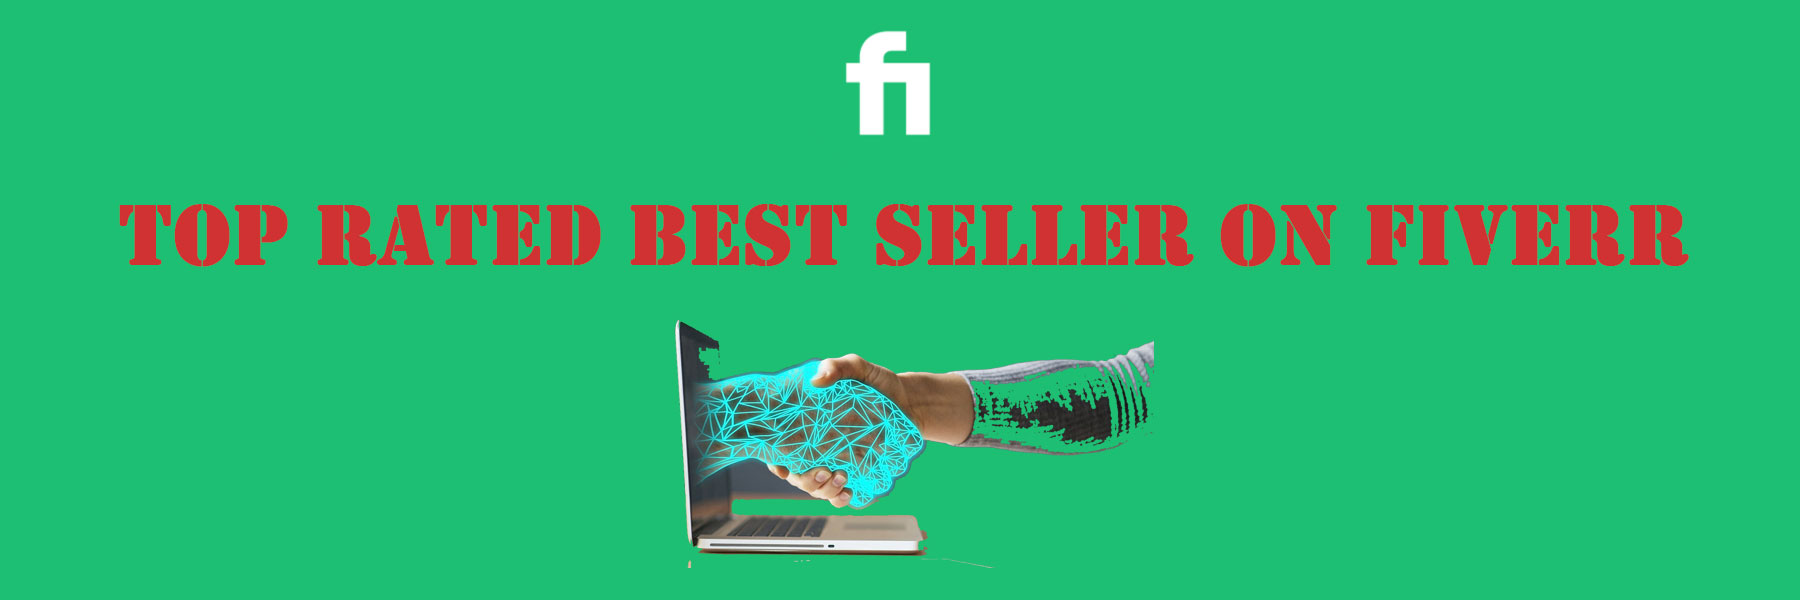 Top Rated Best Seller on Fiverr